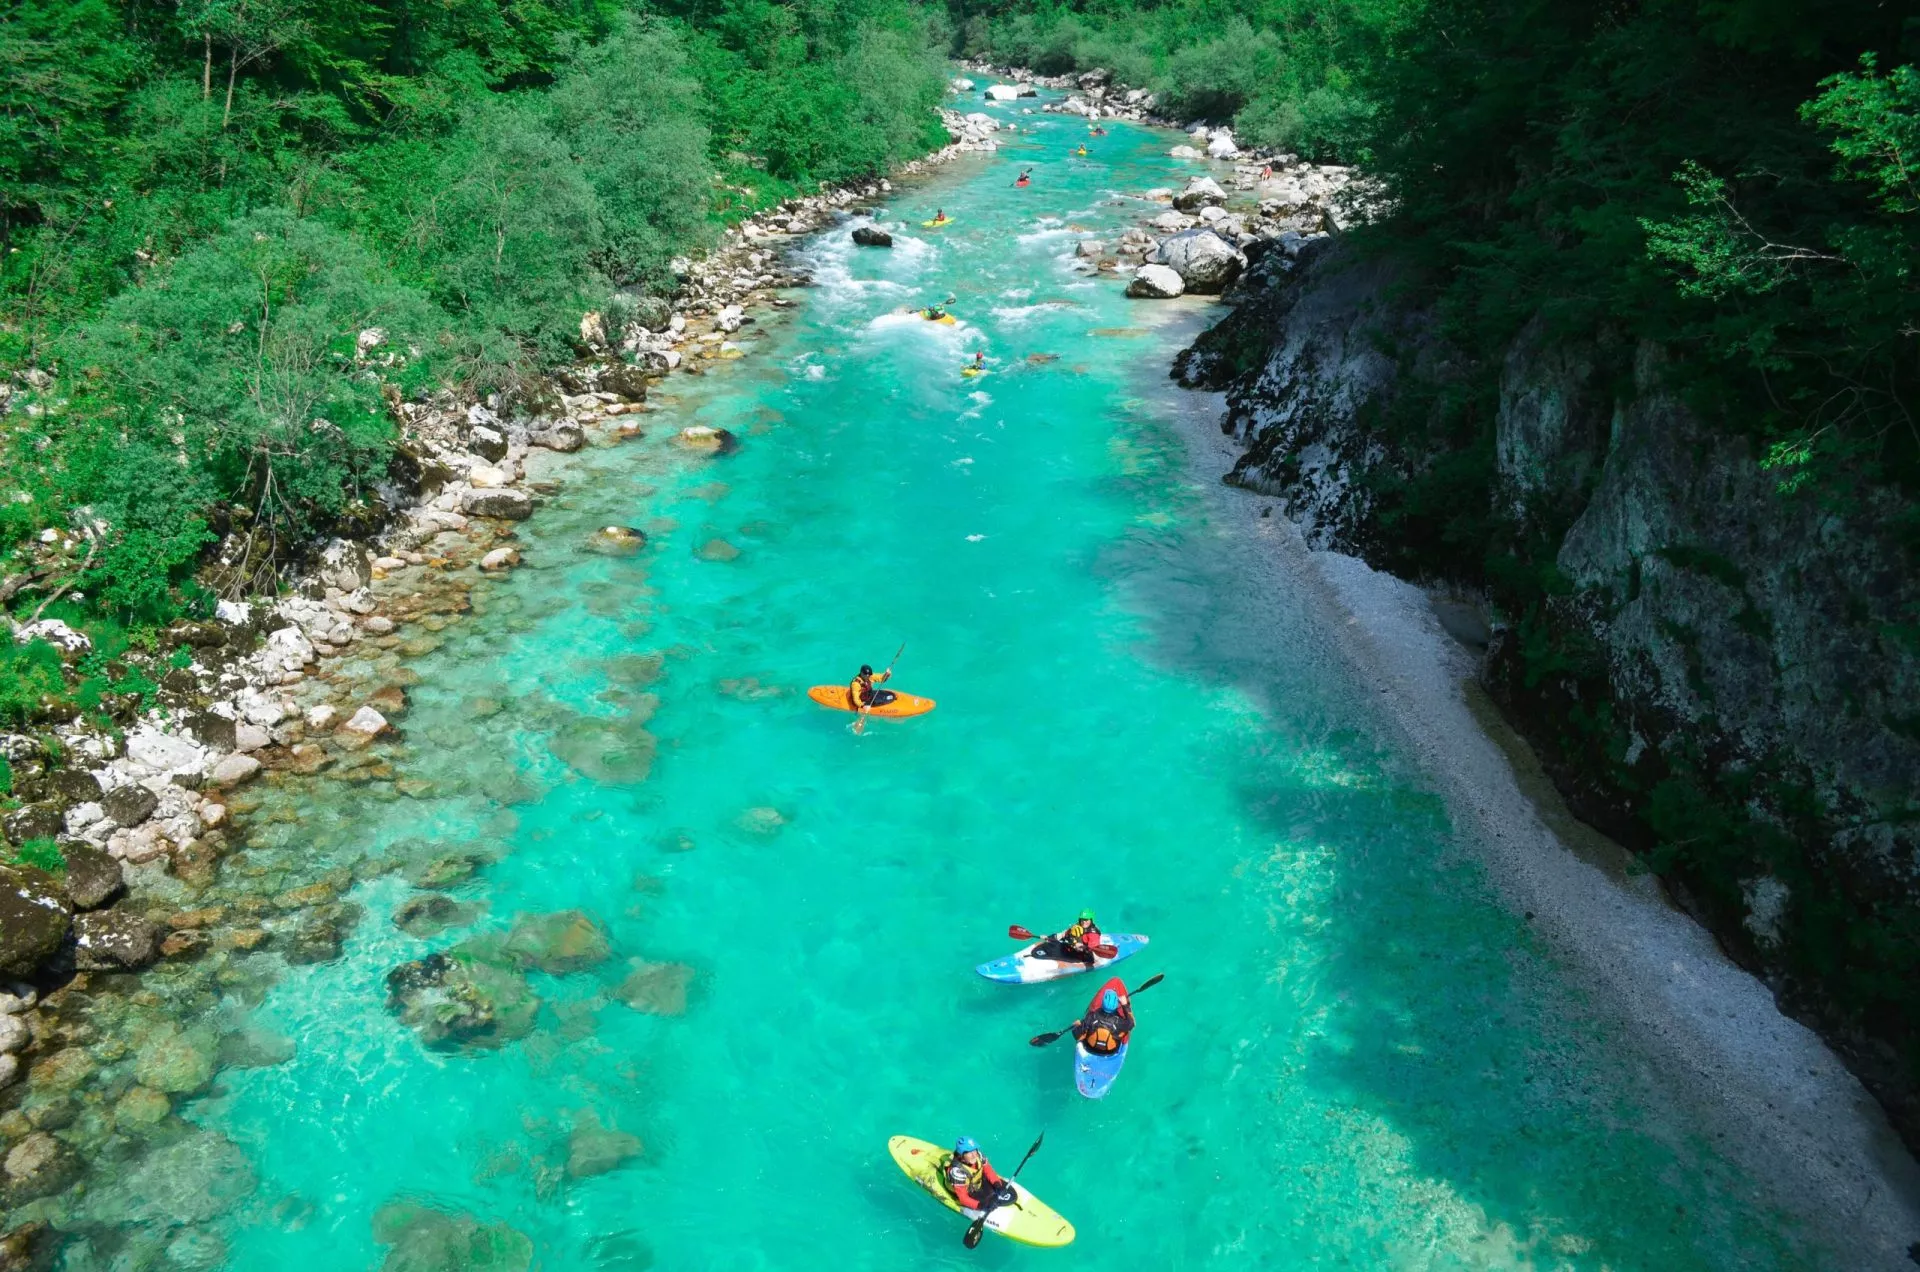 Join an adrenaline-induced adventure on the Soča River